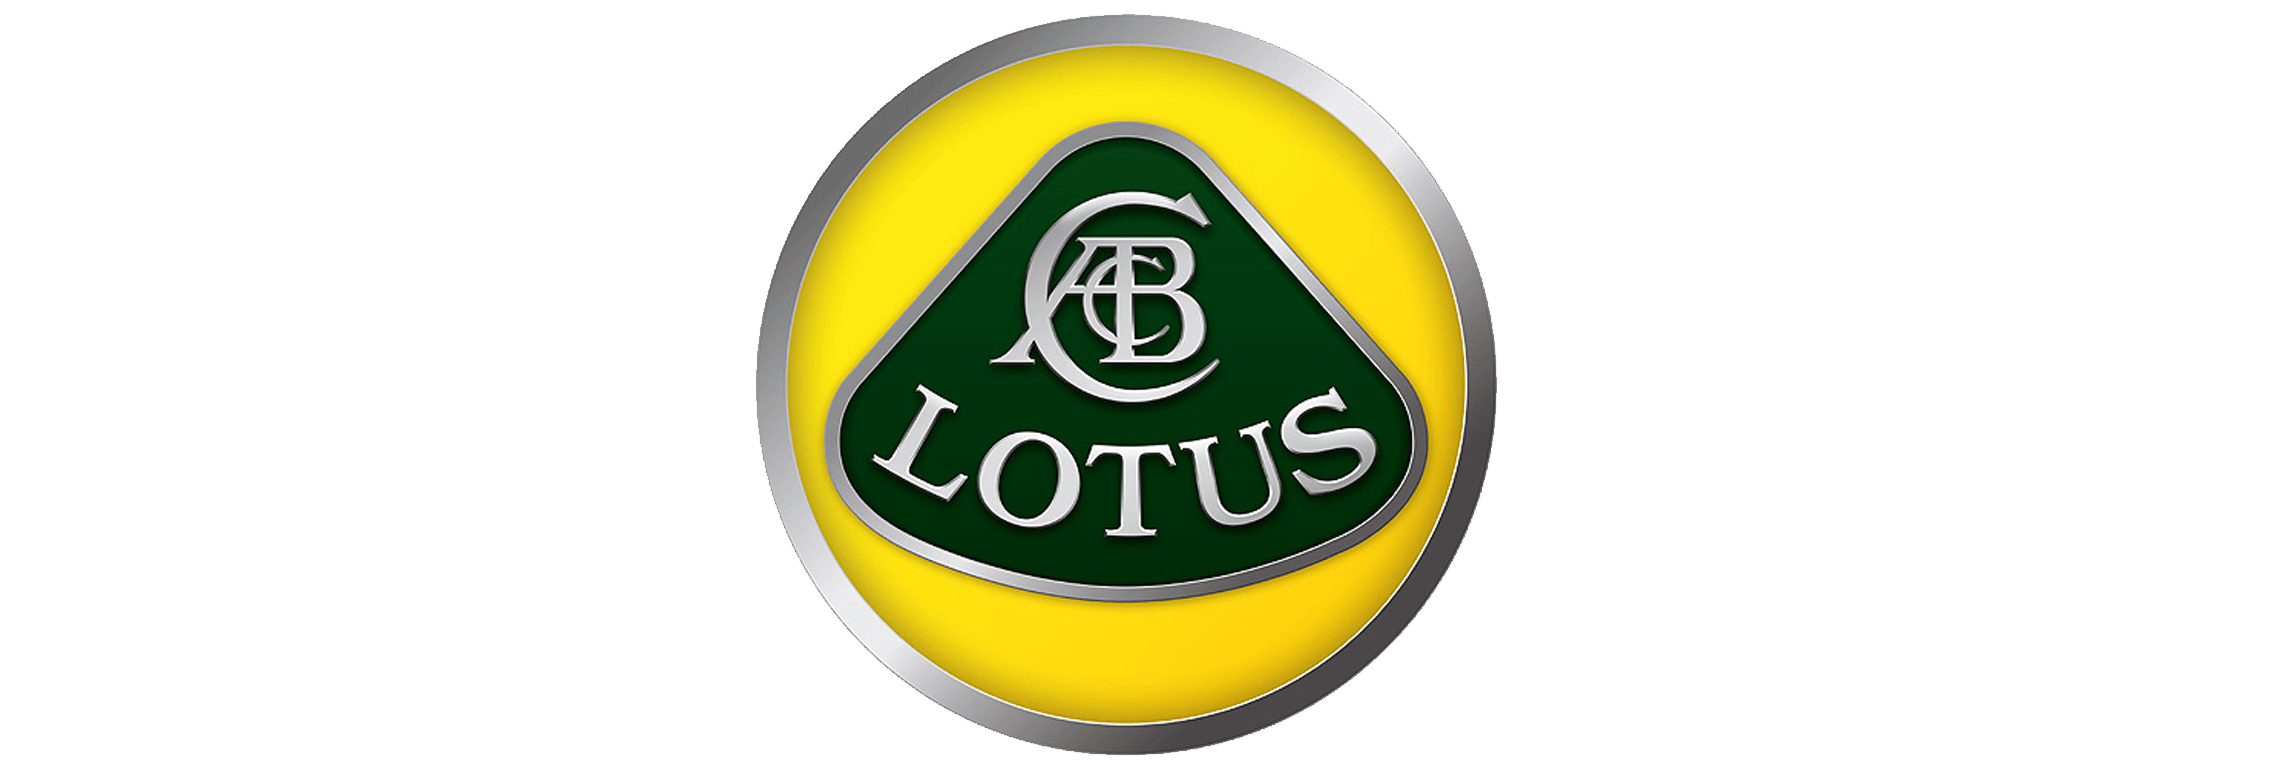 Green Circle Car Logo - Lotus Logo Meaning and History, latest models. World Cars Brands